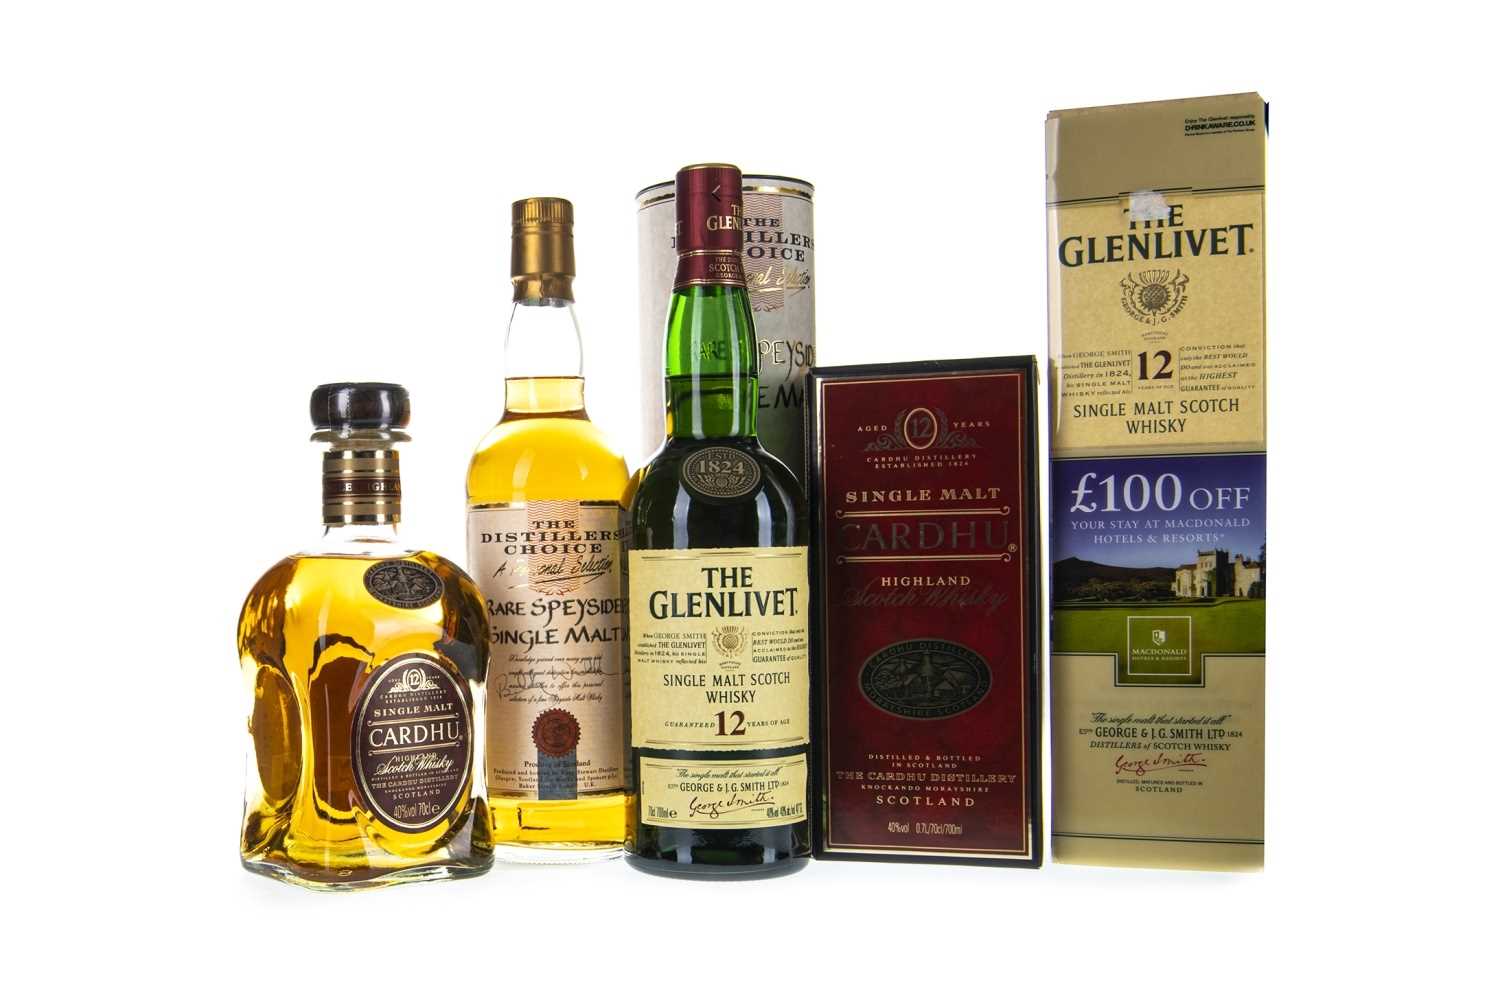 Lot 322 - GLENLIVET 12 YEARS OLD, CARDHU AGED 12 YEARS AND THE DISTILLER'S CHOICE